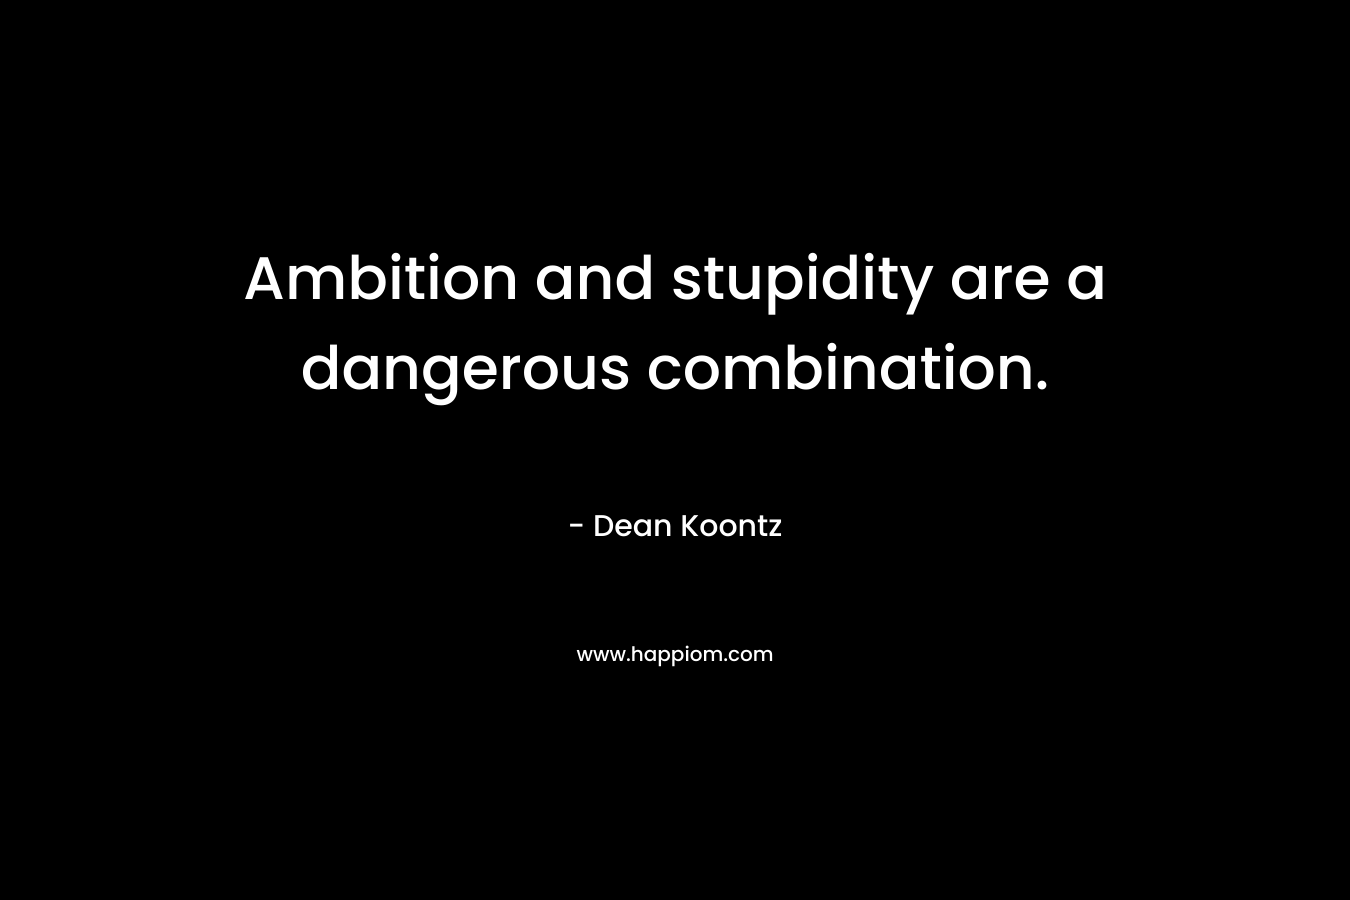 Ambition and stupidity are a dangerous combination.